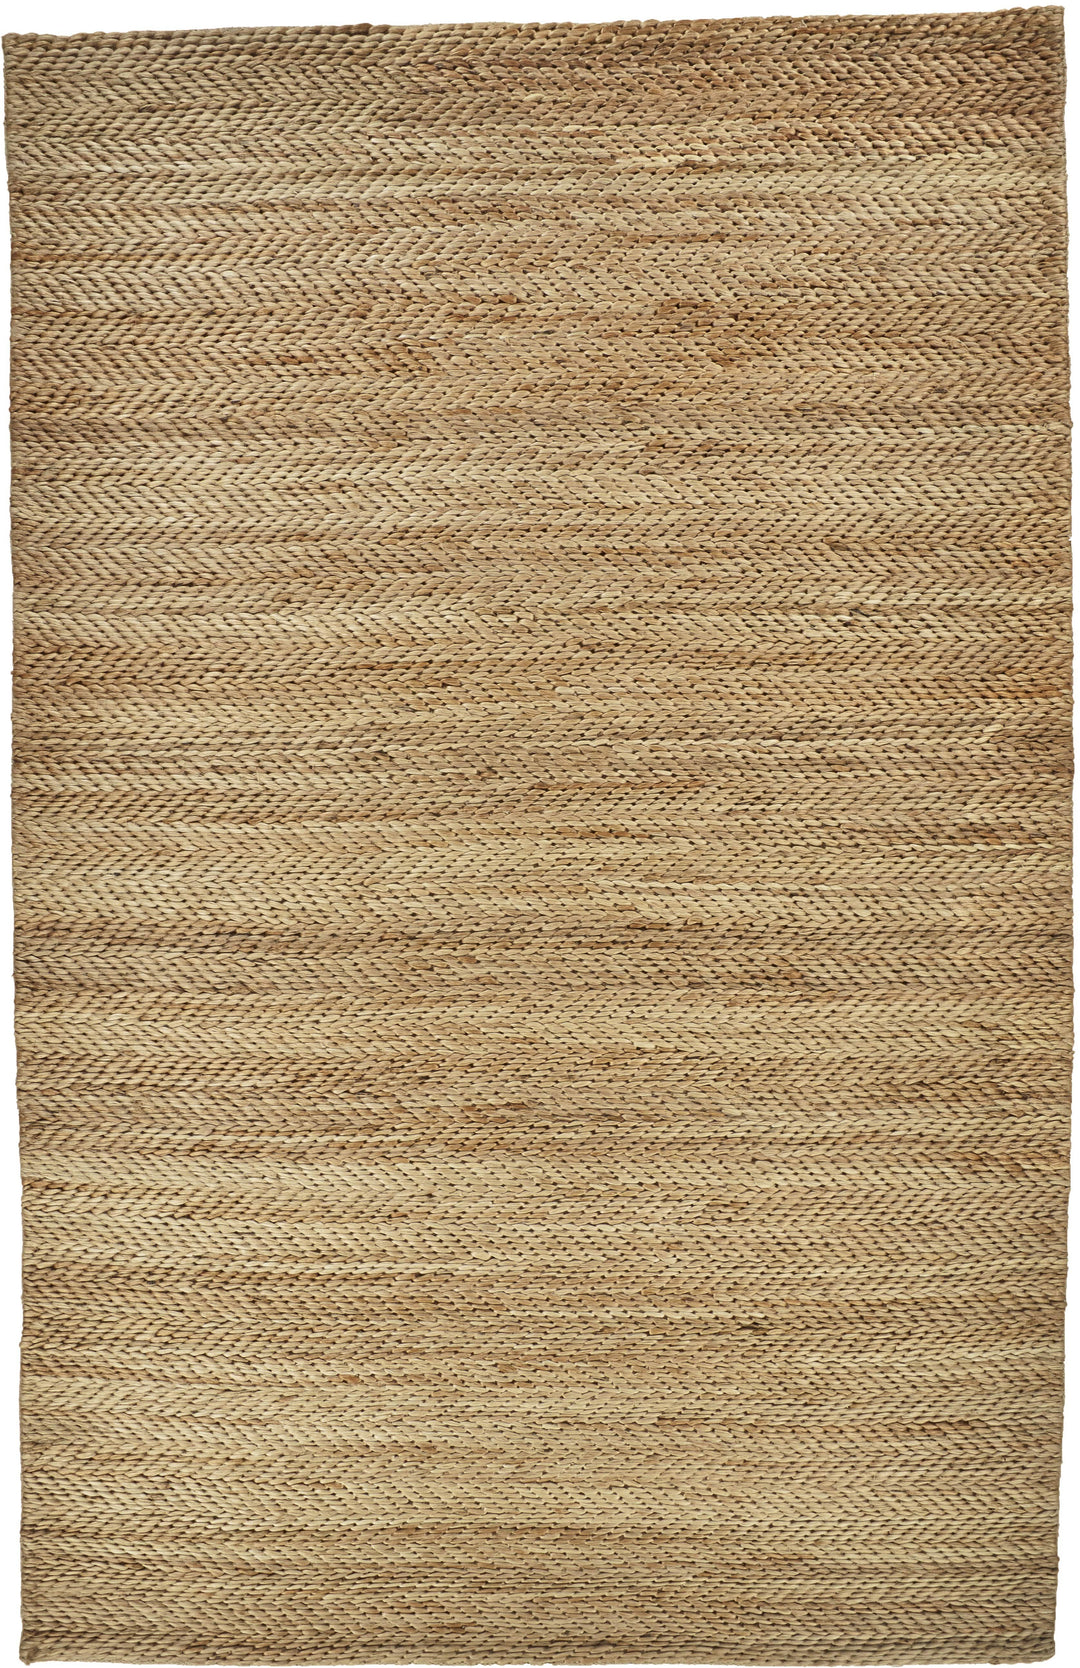 Feizy Feizy Kaelani Natural Handmade Rug - Available in 5 Sizes - Natural Tan 4' x 6' 6850770FNAT000C00